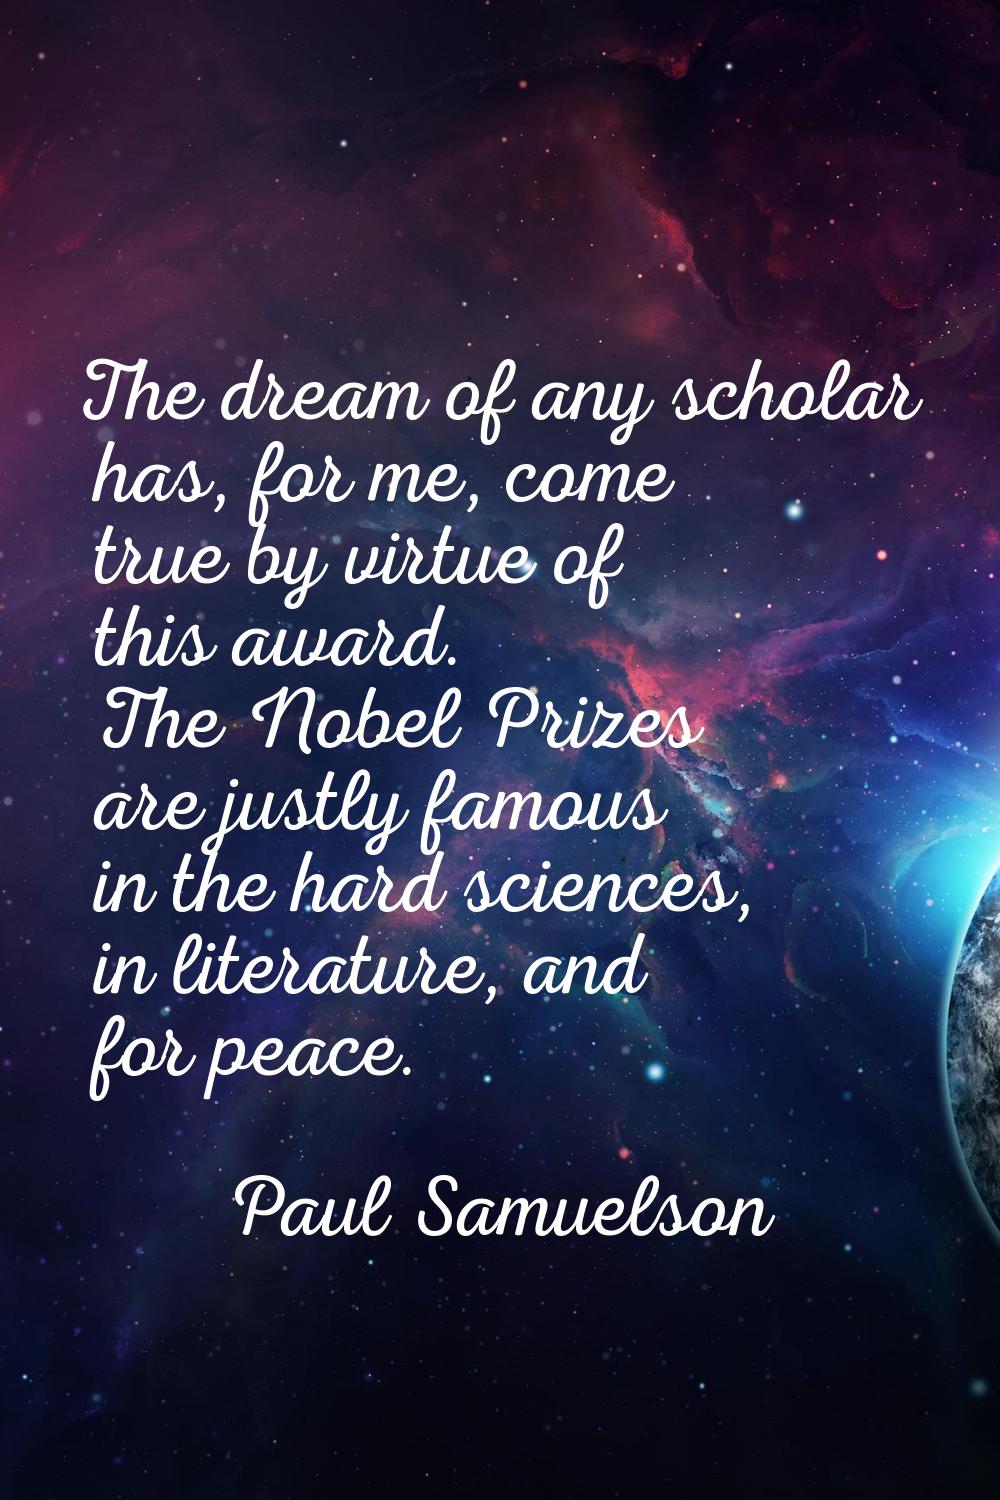 The dream of any scholar has, for me, come true by virtue of this award. The Nobel Prizes are justl